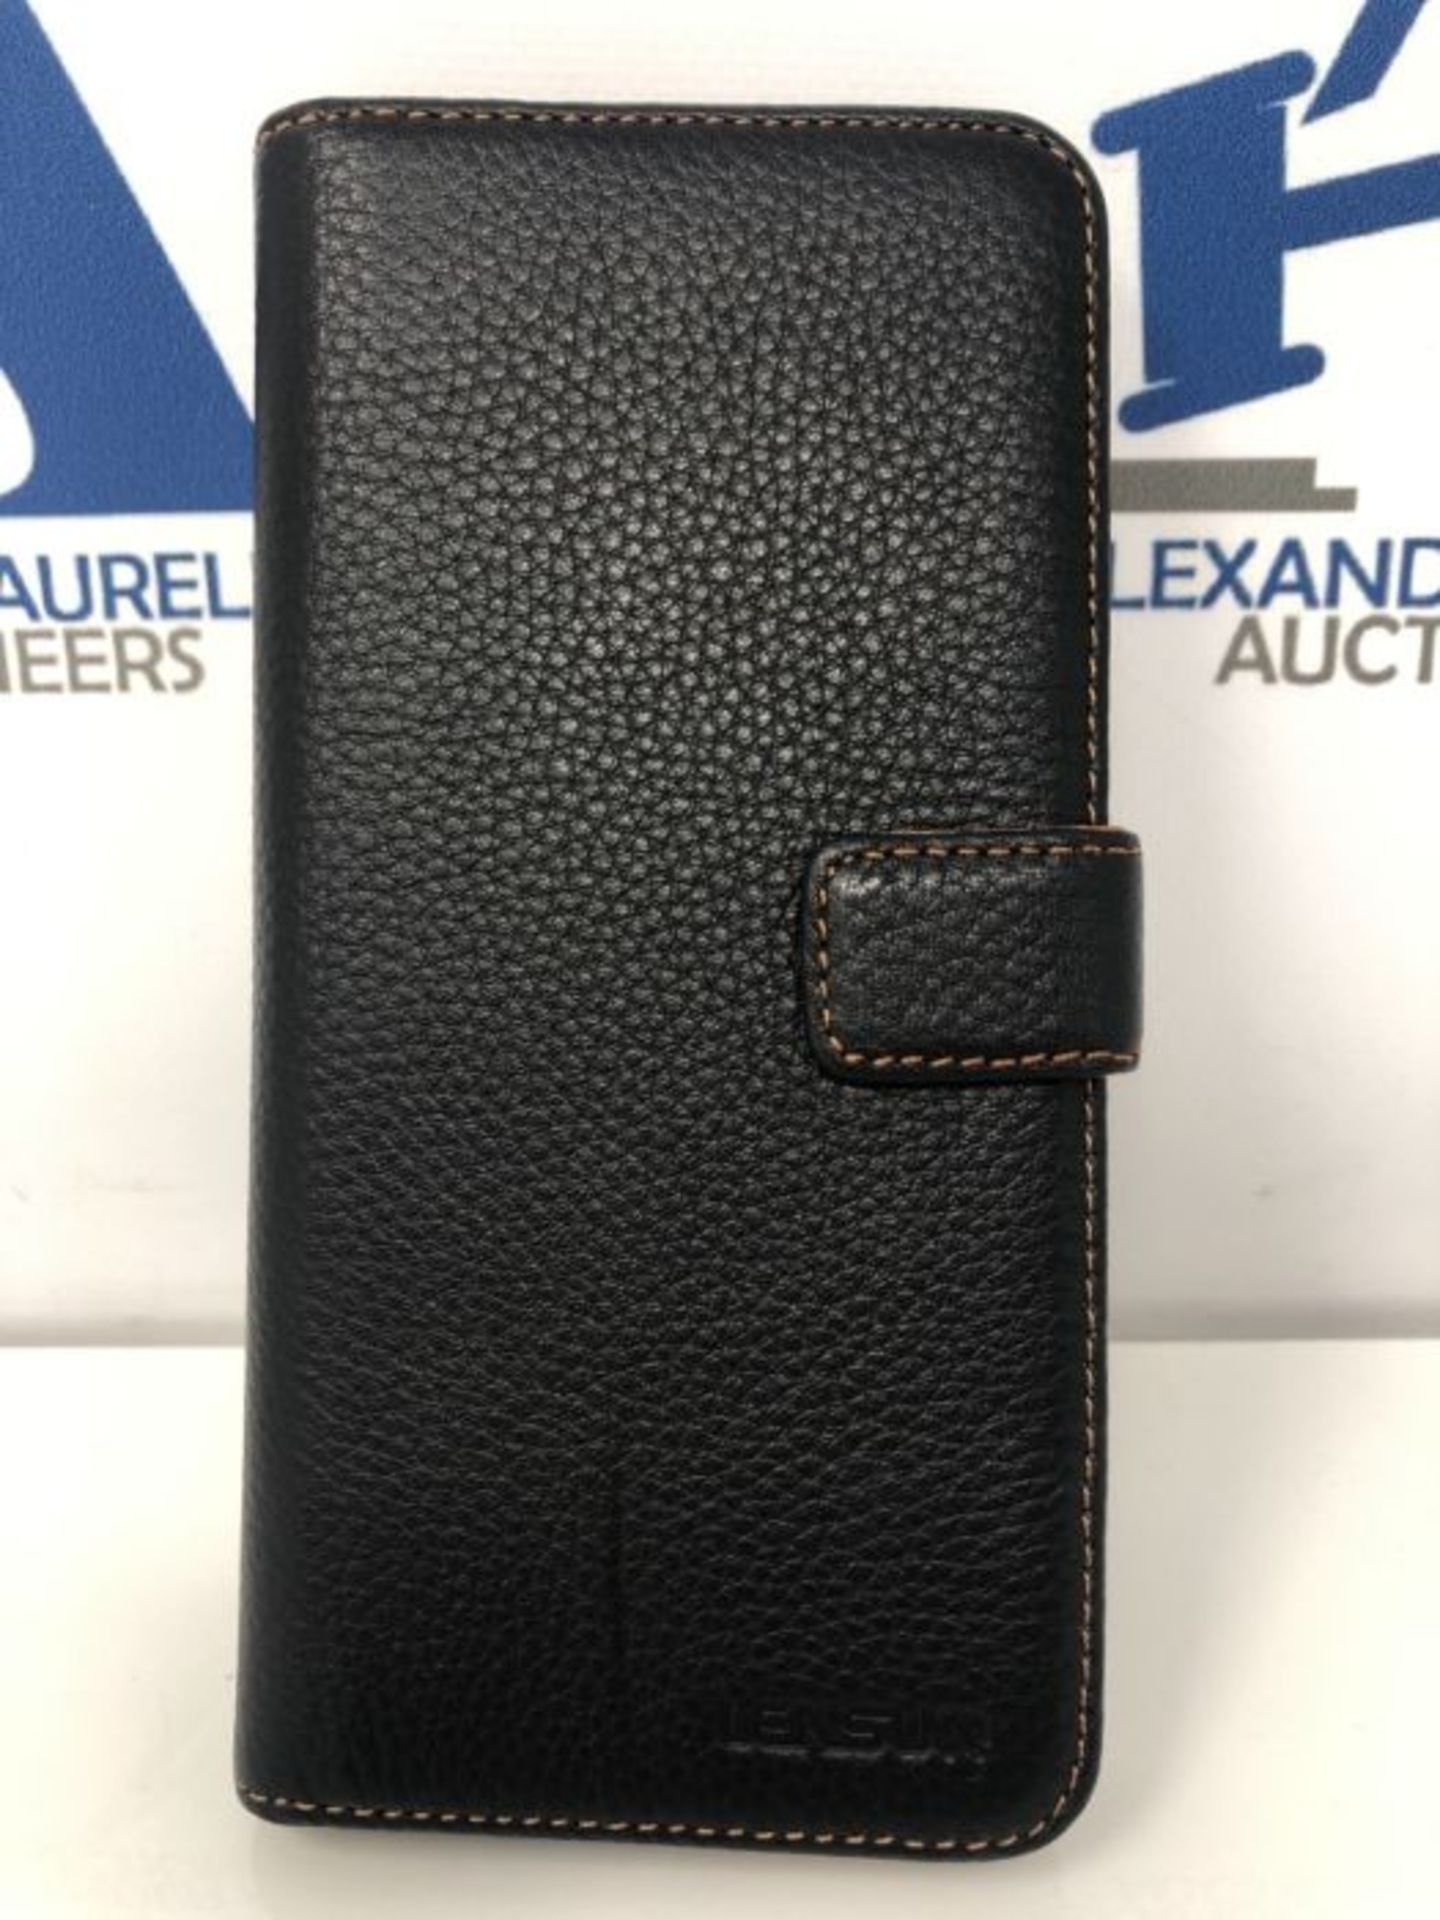 LENSUN Samsung Galaxy Note 10 Lite Leather Case, Flip Genuine Leather Wallet Phone Cas - Image 2 of 3